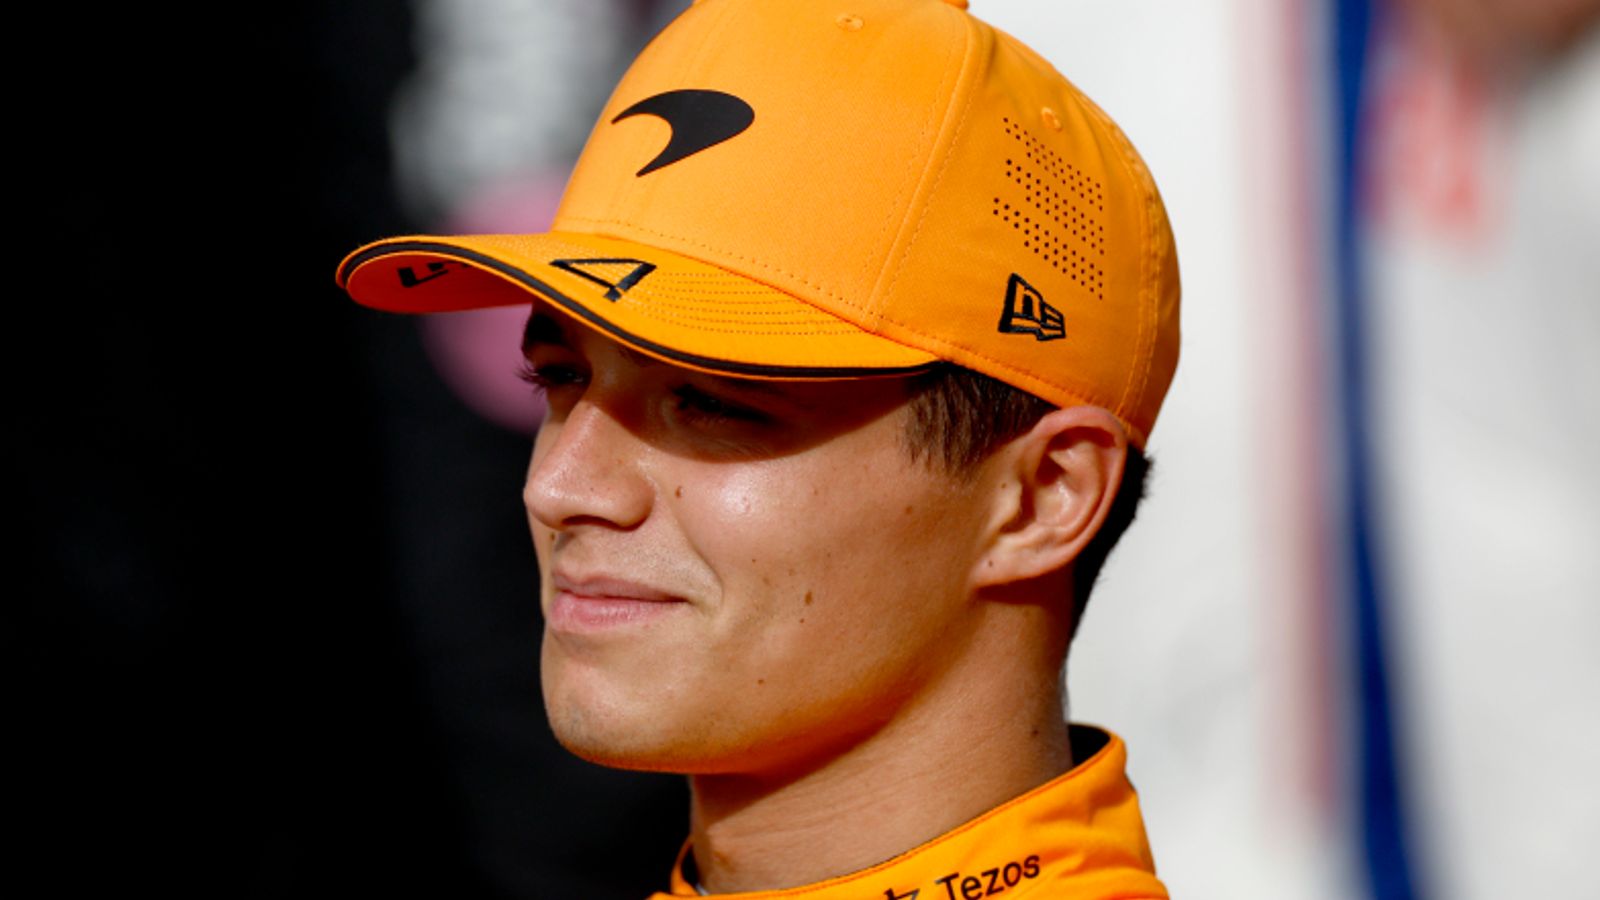 Lando Norris: McLaren driver says he maintains ‘faith’ in team despite disappointing 2022 F1 campaign